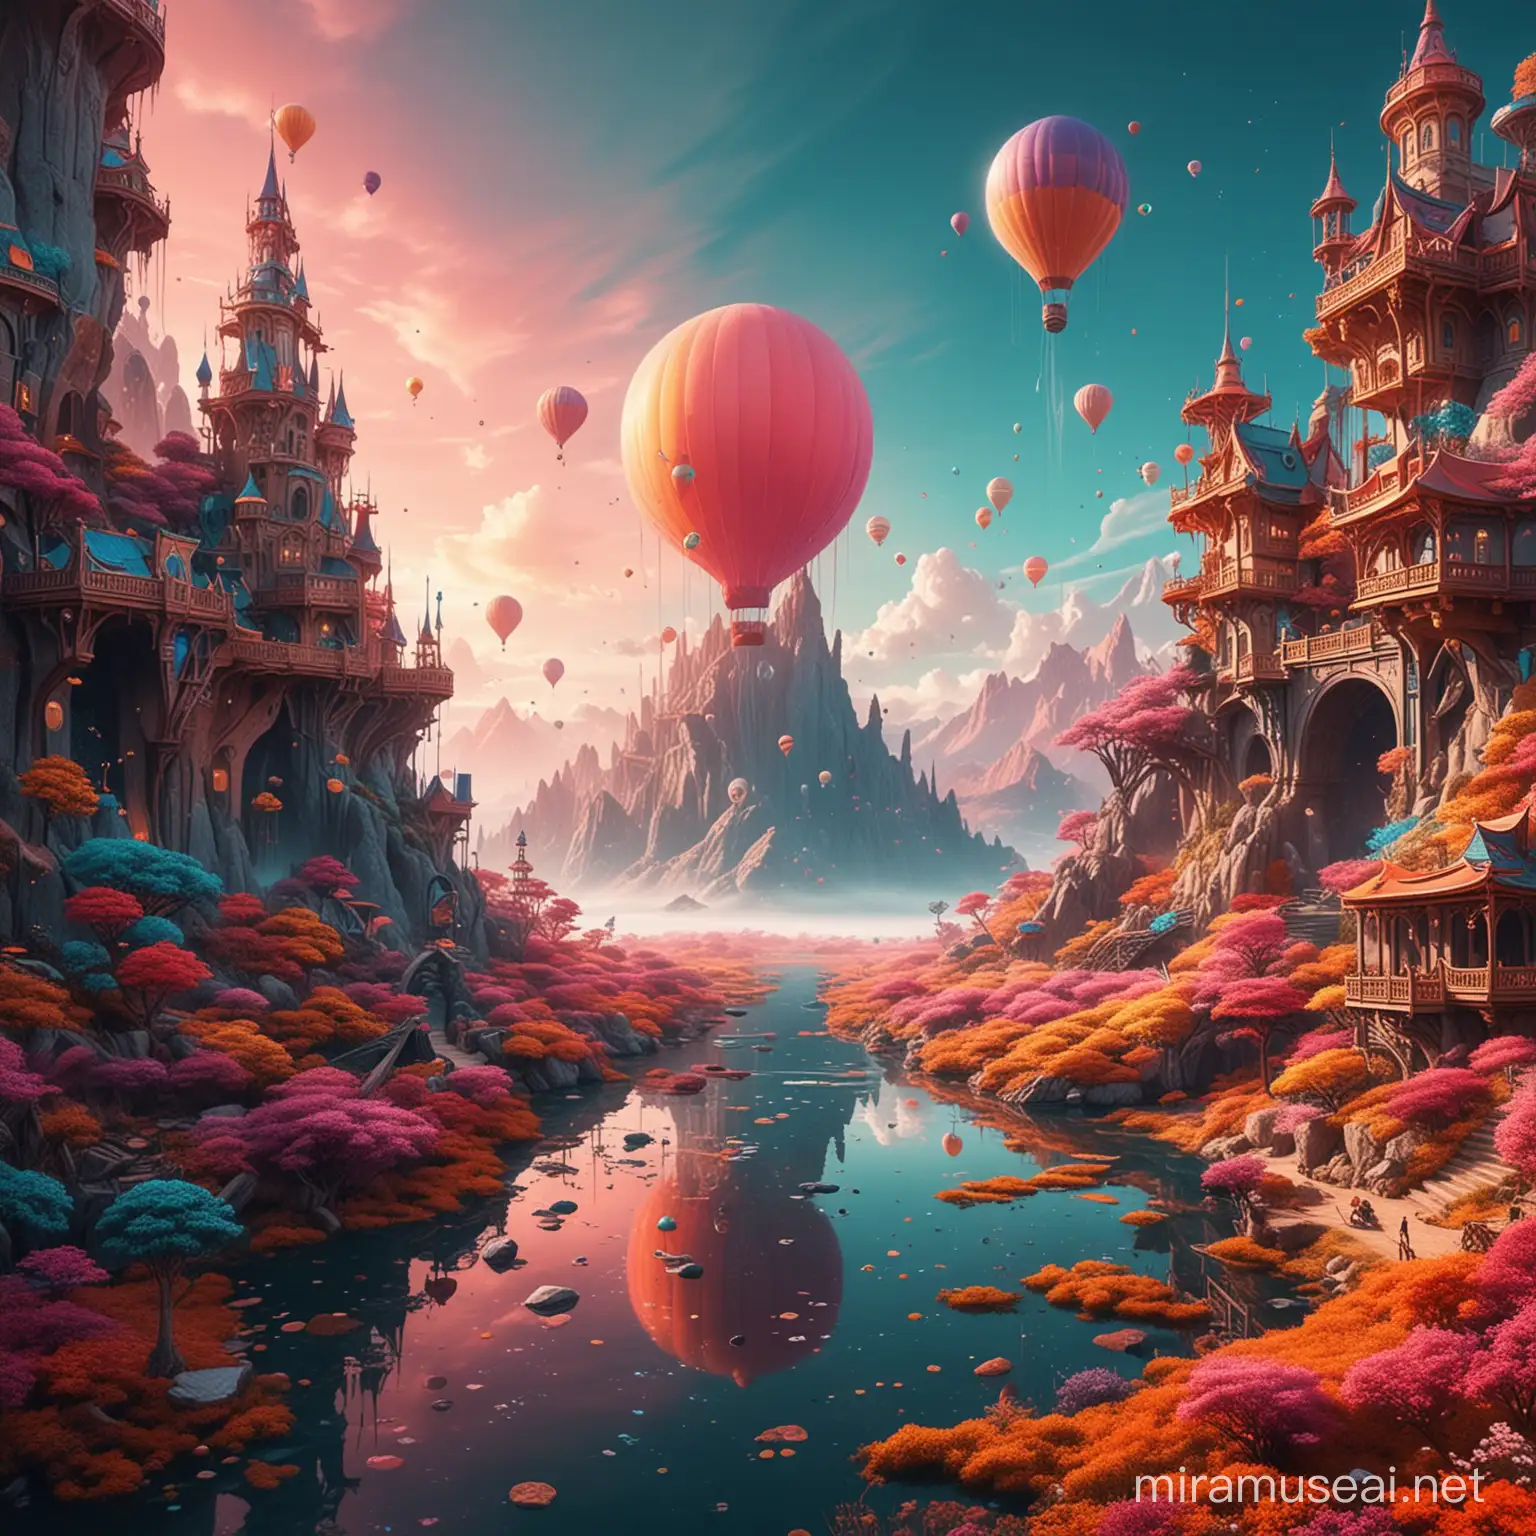 a fantasi world where the colors are surreal and has a crazy composition
